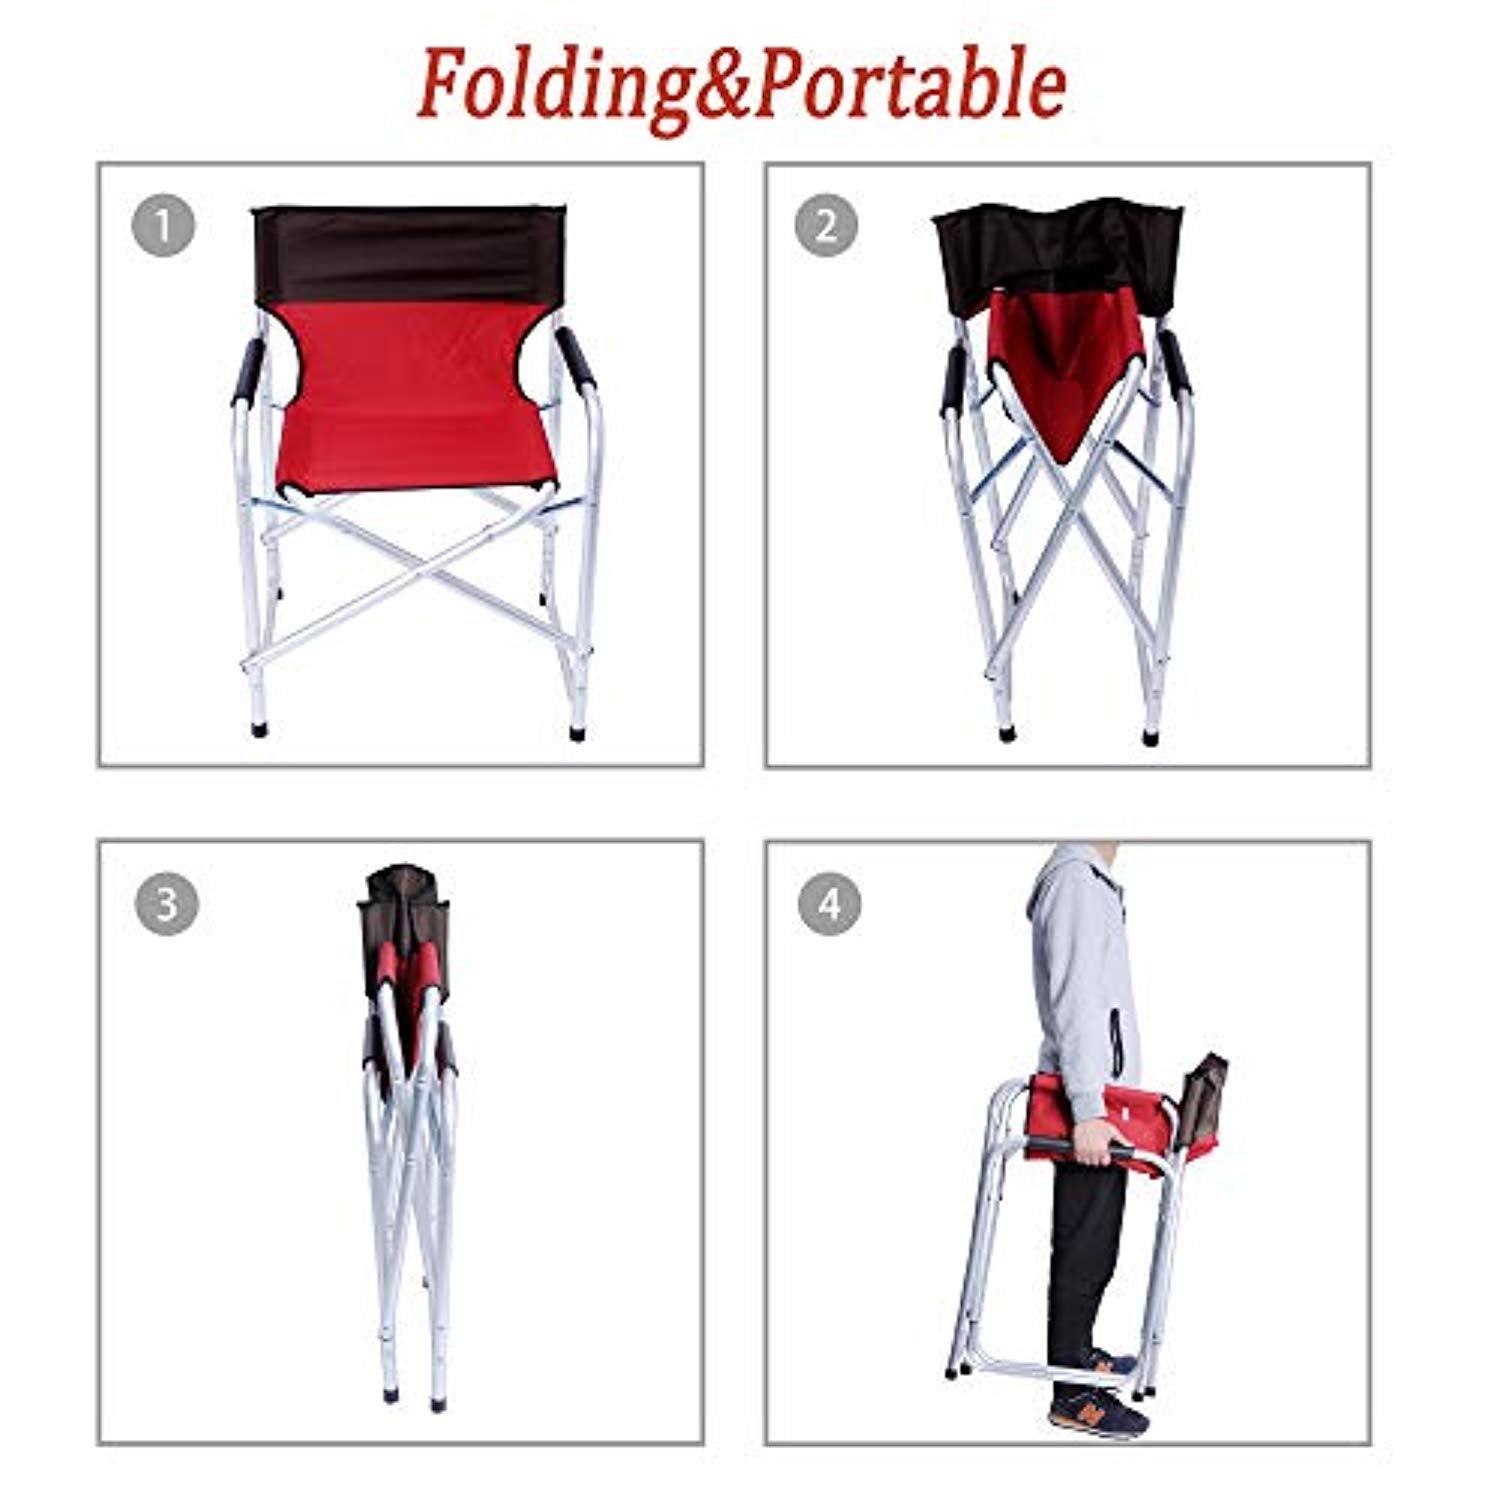 Bosonshop Folding Director's Chair Portable Aluminum Camping Chairs with Armrest for Outdoor Activity